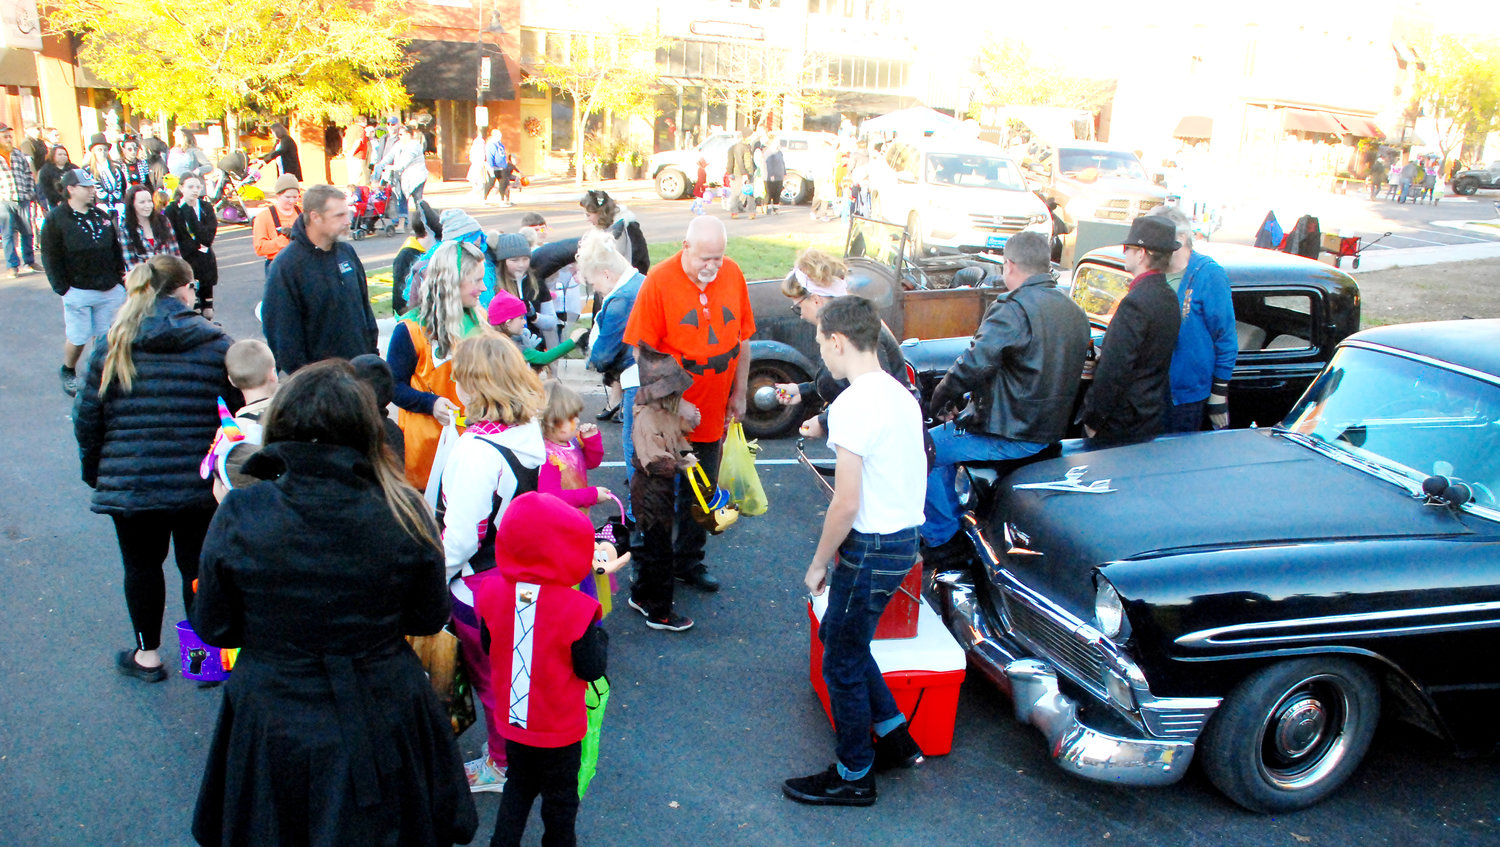 THE STREETS OF OZARK were filling up about 15 minutes before the official start time of 5:30 p.m. for the Downtown Ozark Trunk or Treat event on Oct. 31.